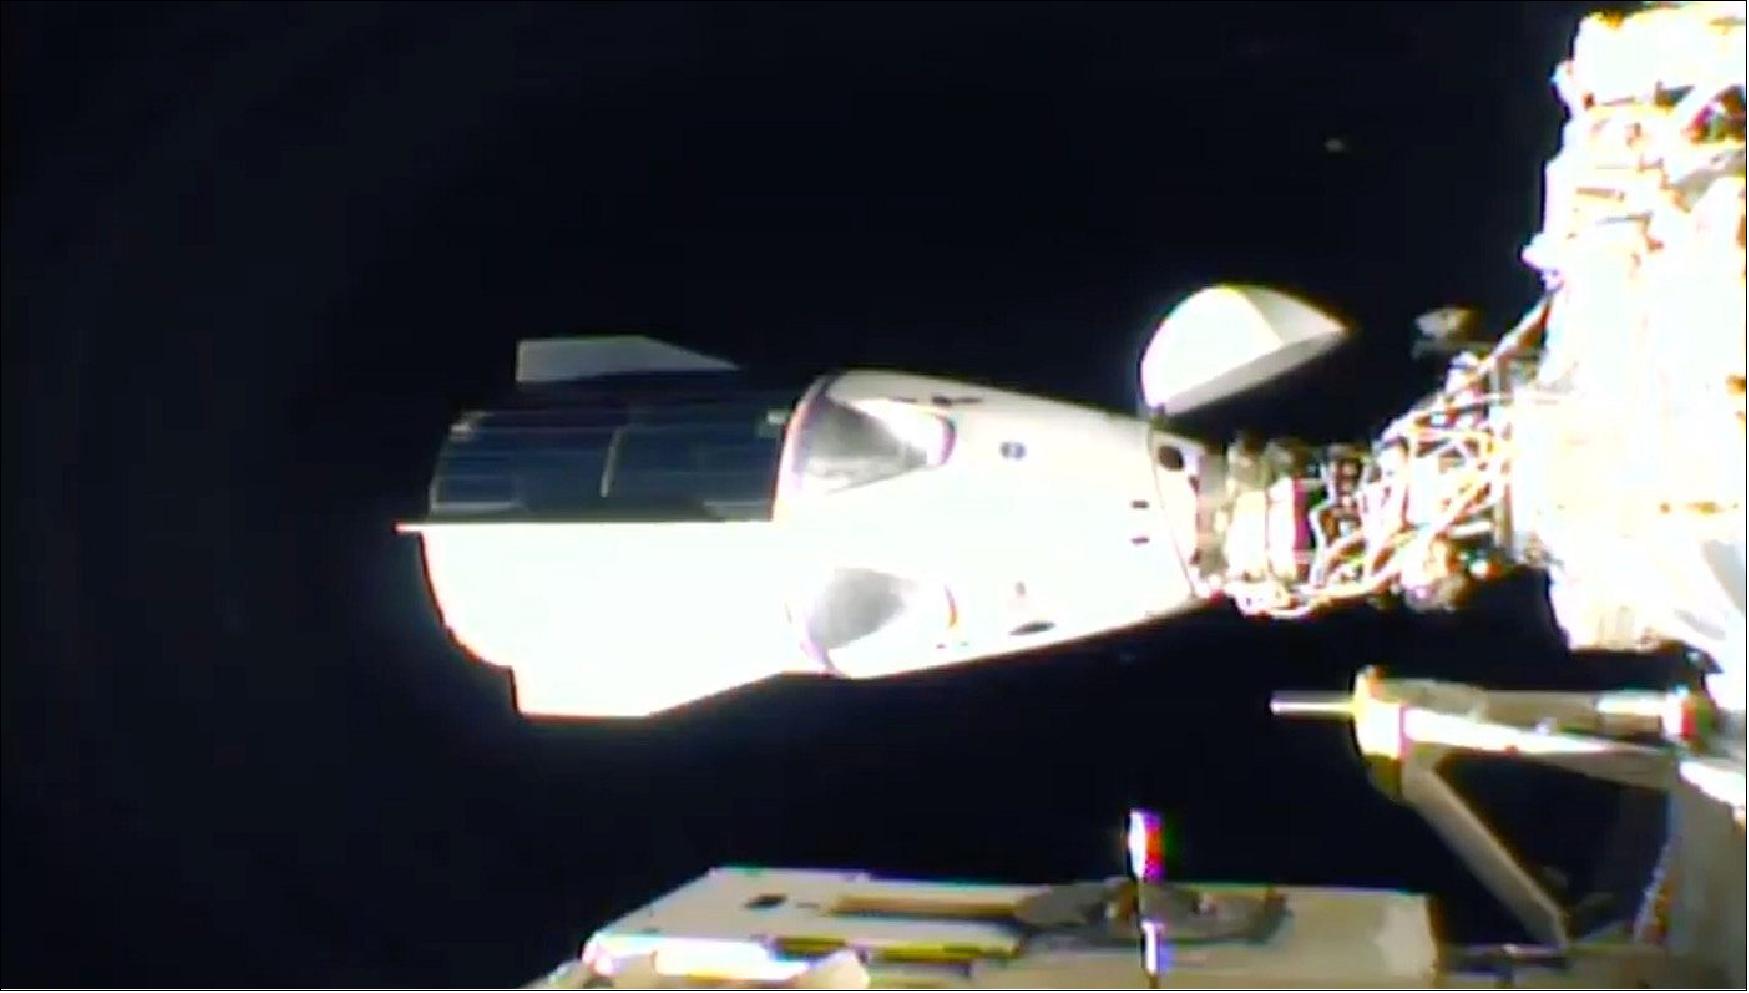 Figure 11: SpaceX’s Crew Dragon “Resilience” spacecraft docked at the International Space Station (image credit: NASA TV/Spaceflight Now) 10)